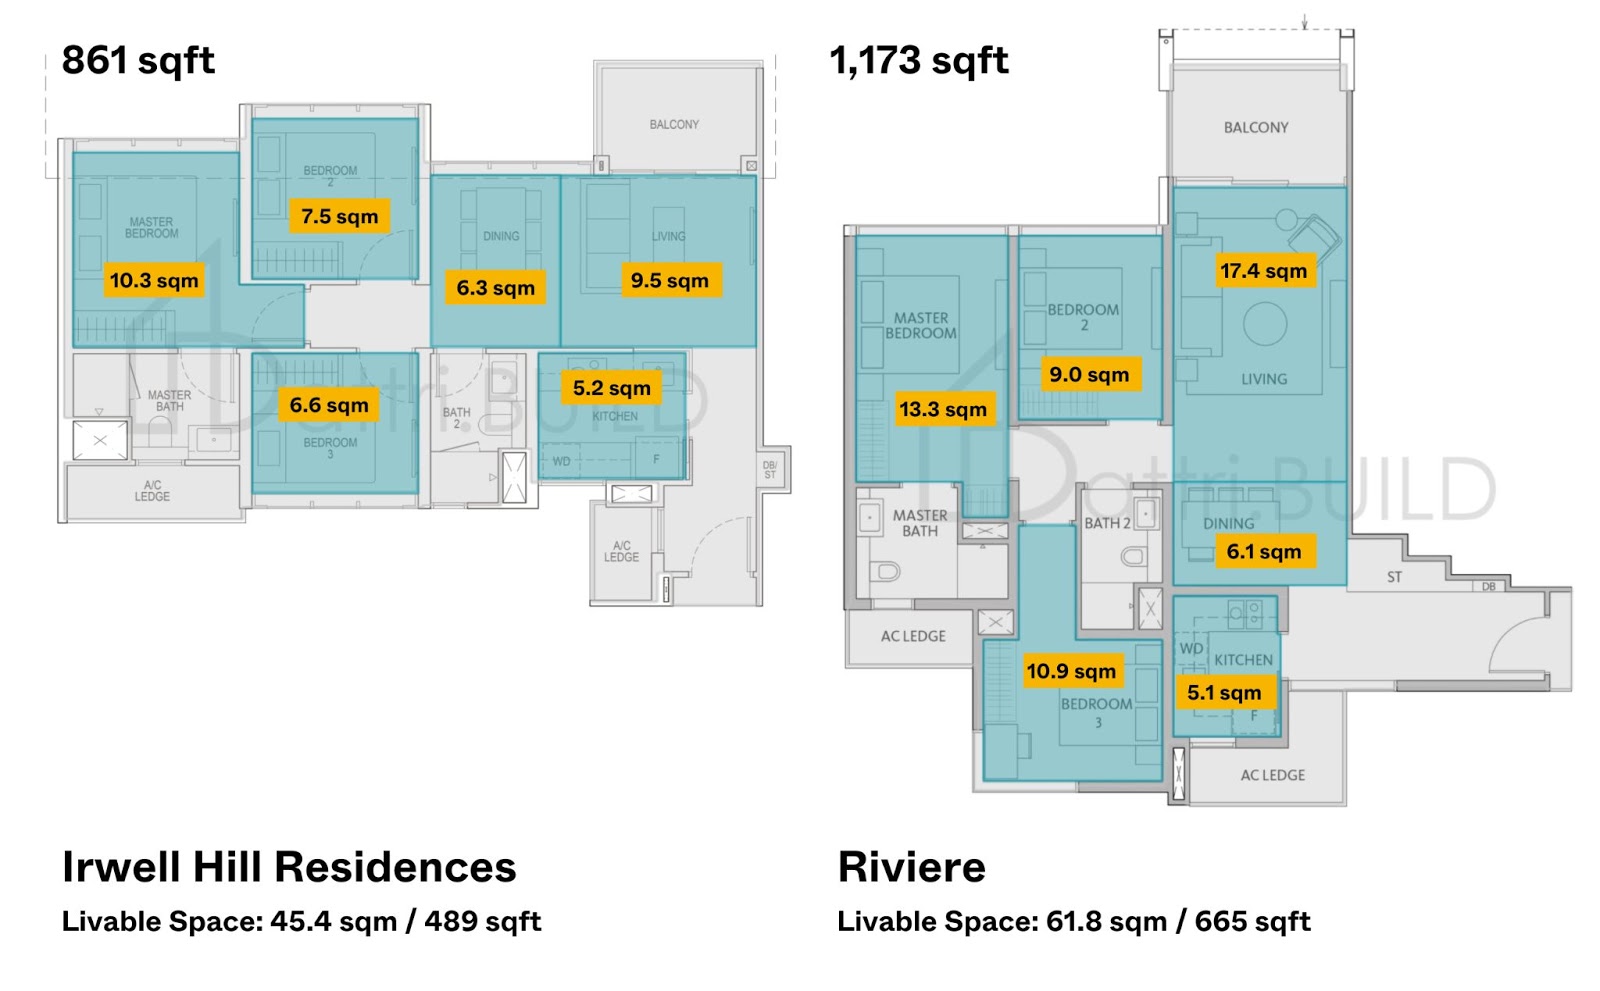 irwell hill residences vs riviere